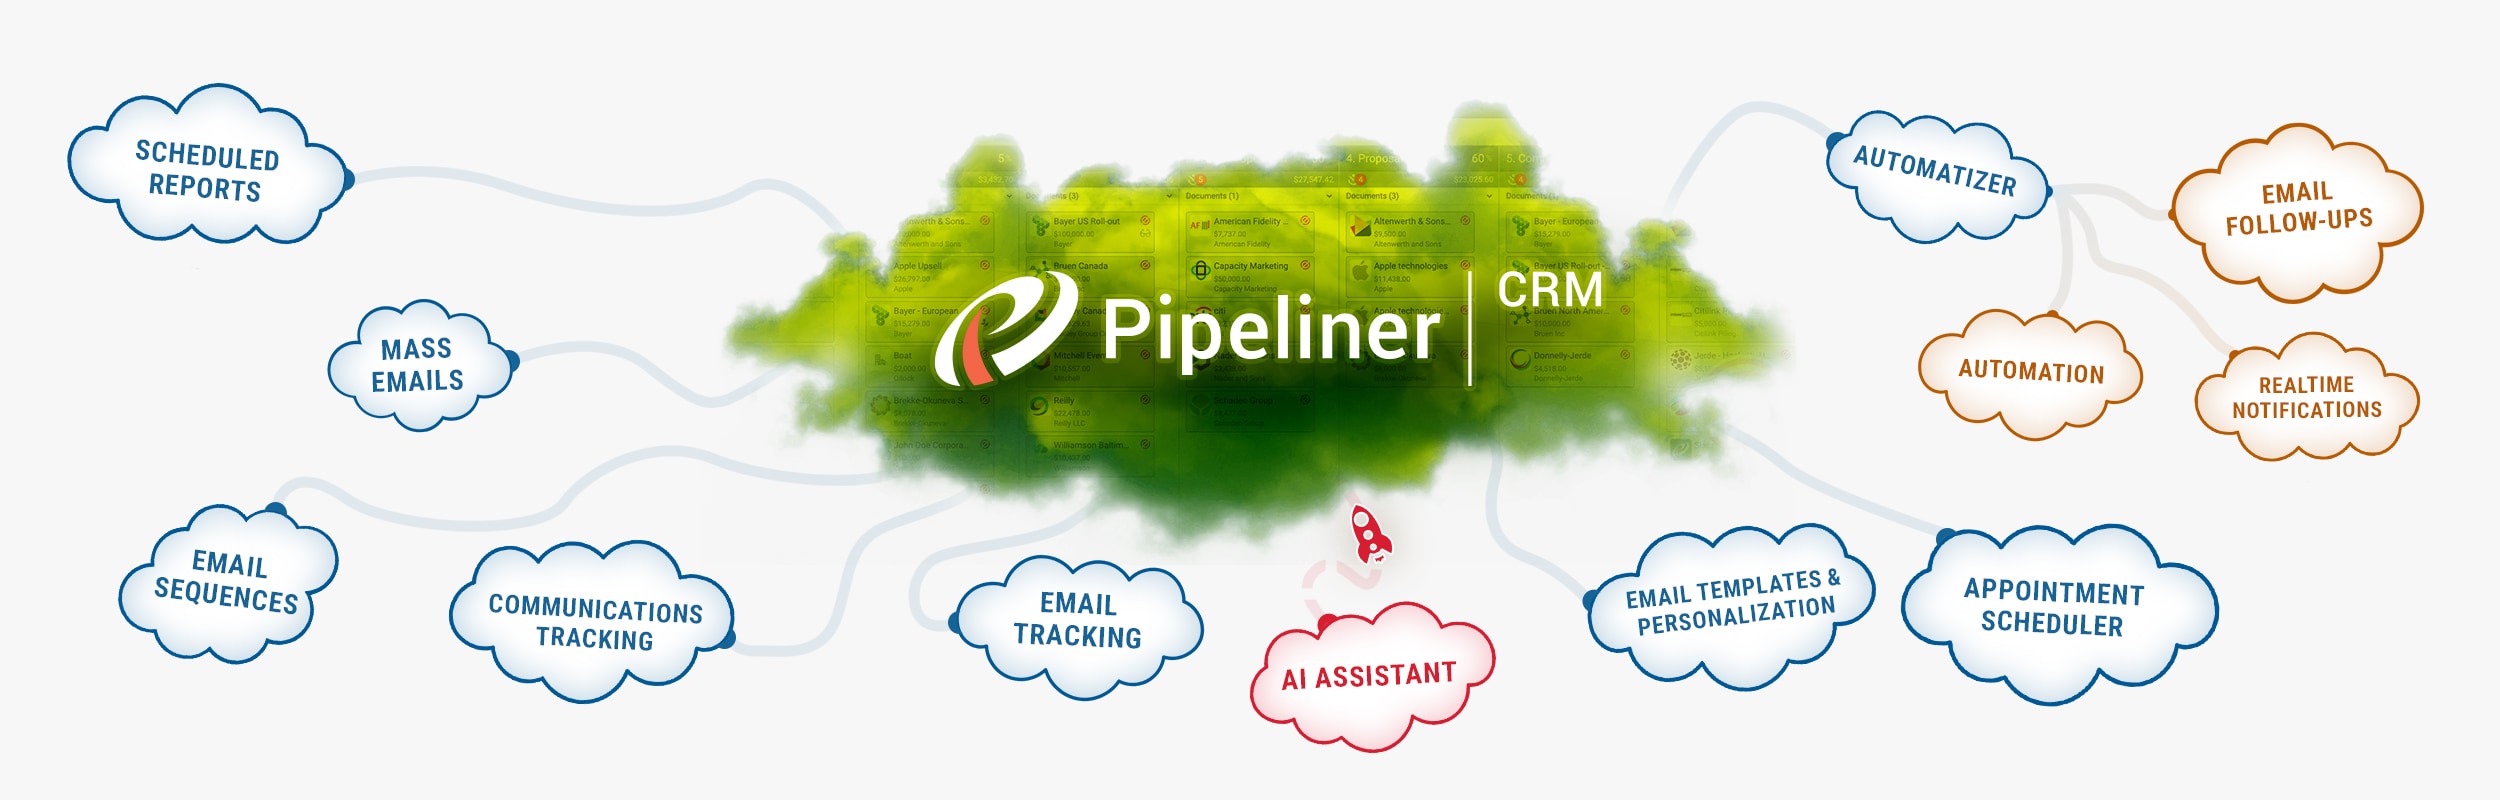 Pipeliner CRM Voyager AI for emails 